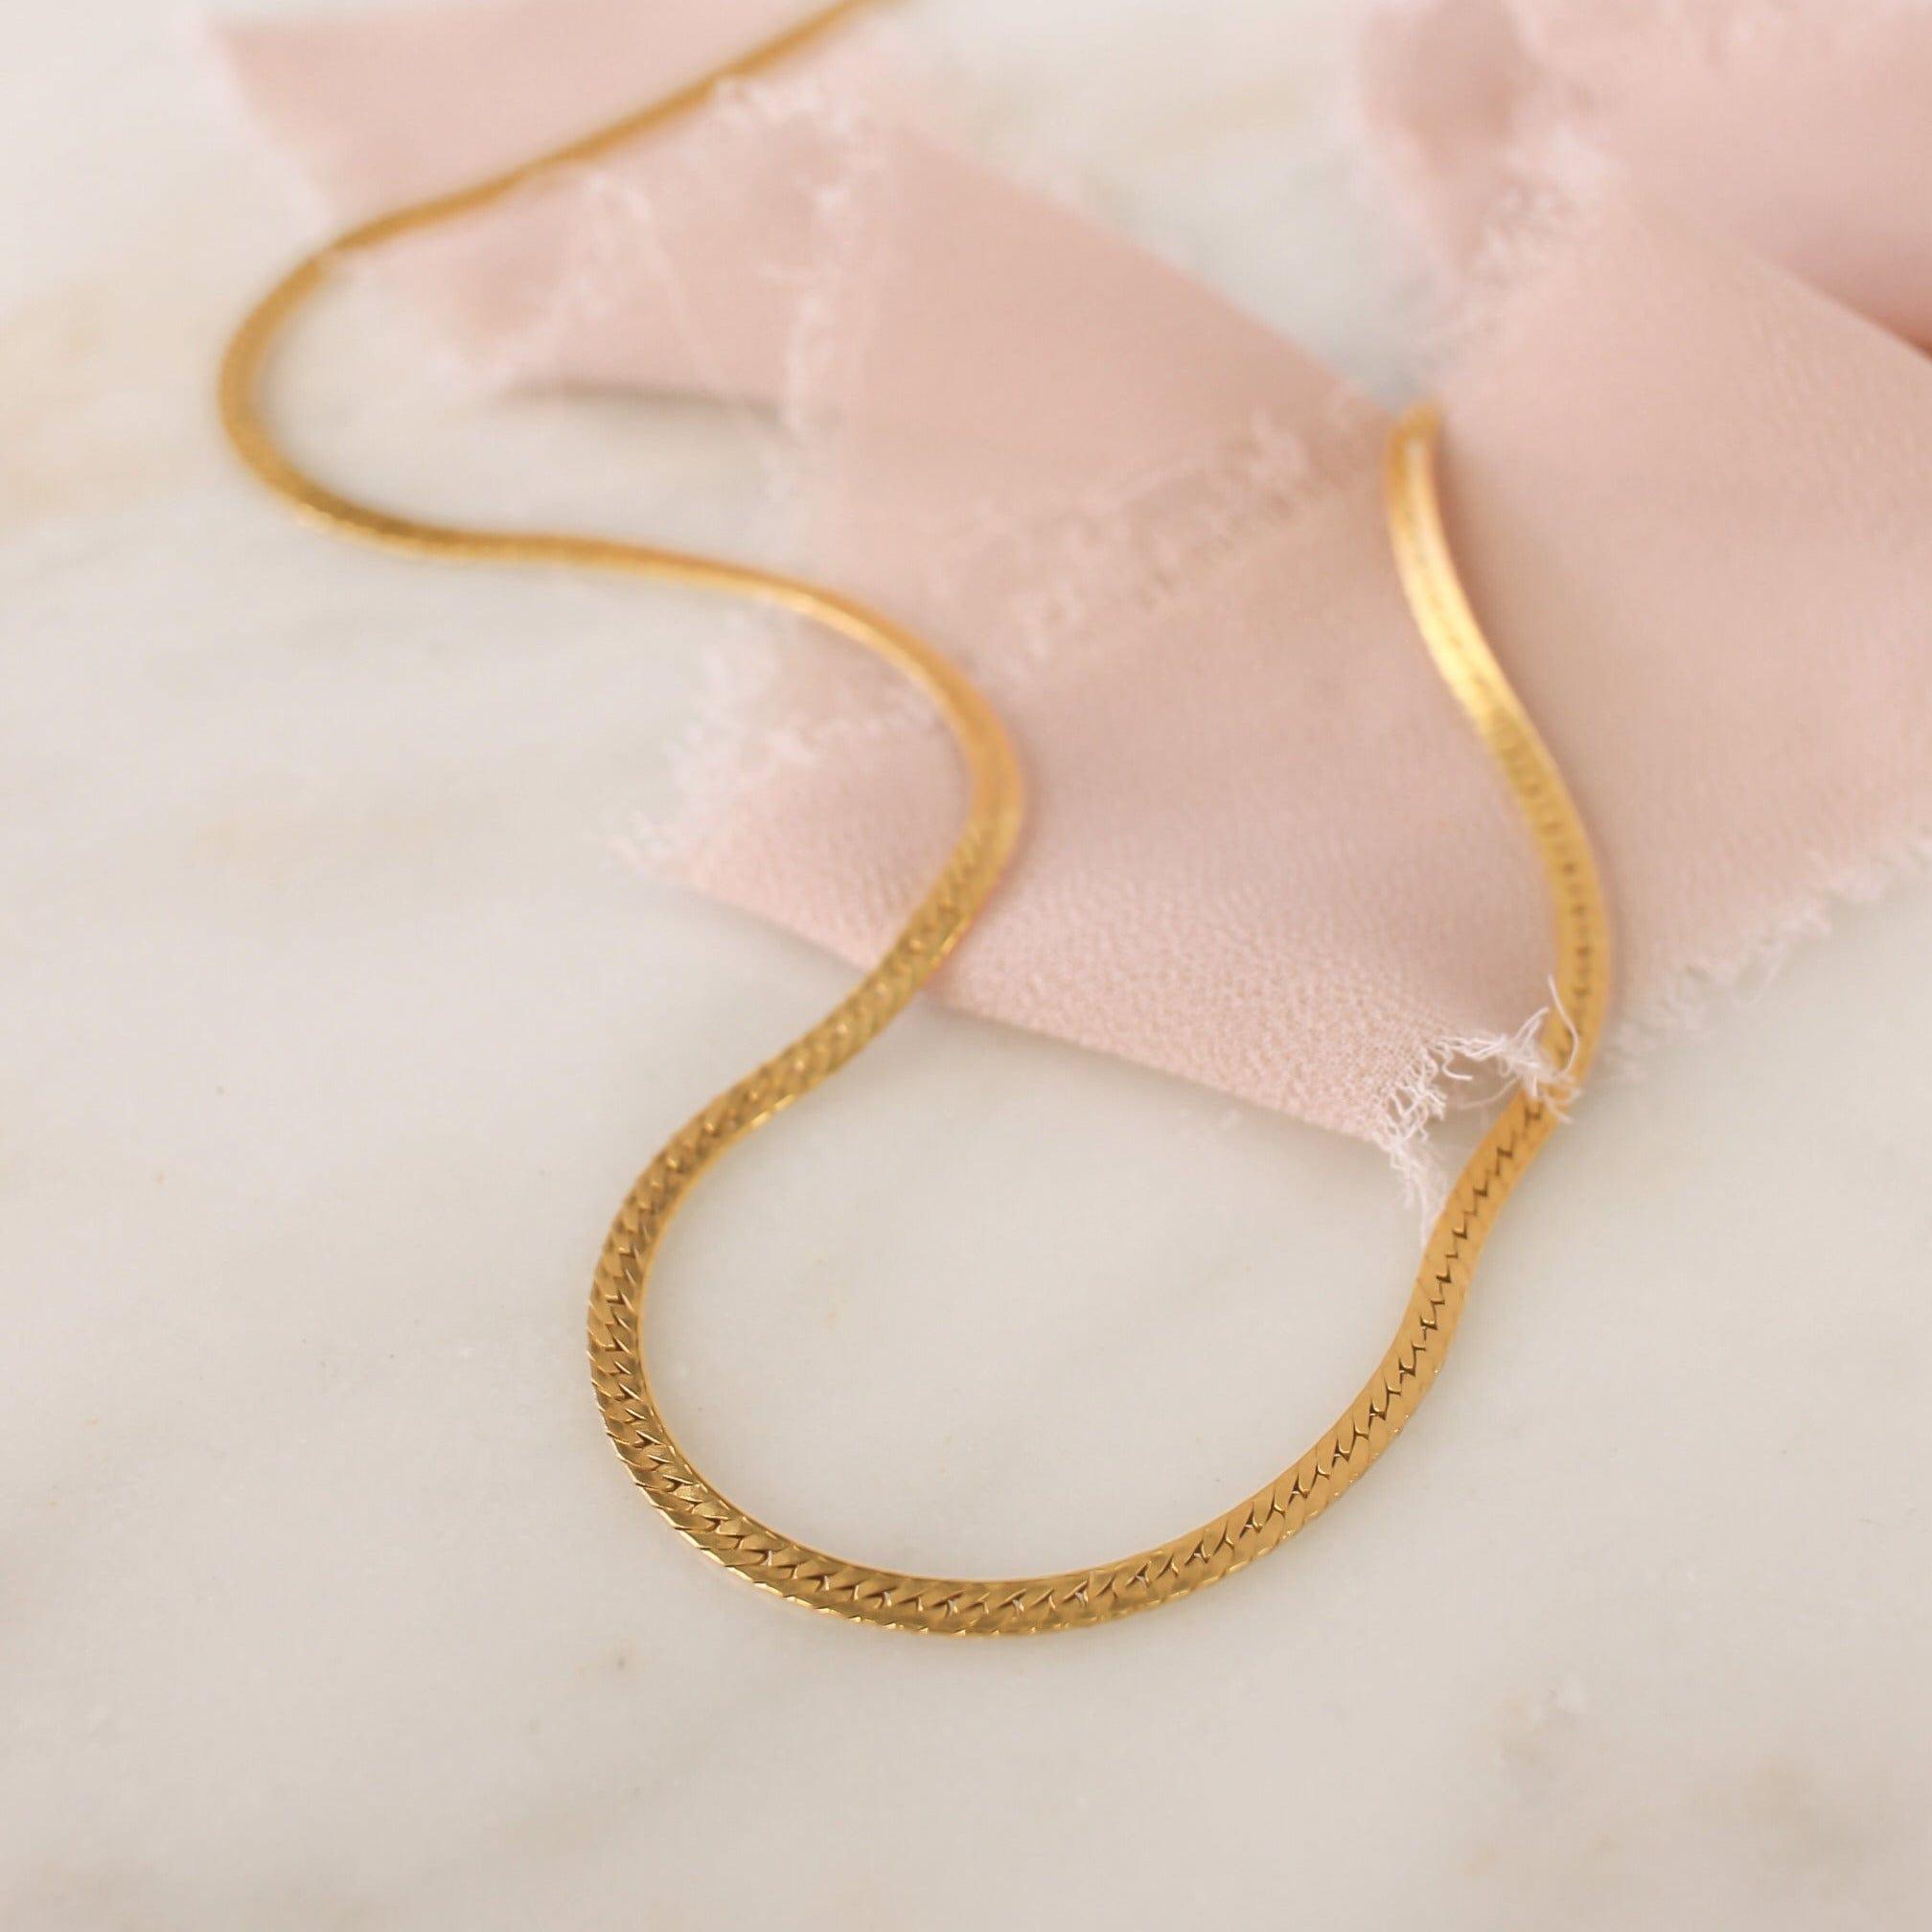 Sadie Chain Necklace - Nolia Jewelry - Meaningful + Sustainably Handcrafted Jewelry